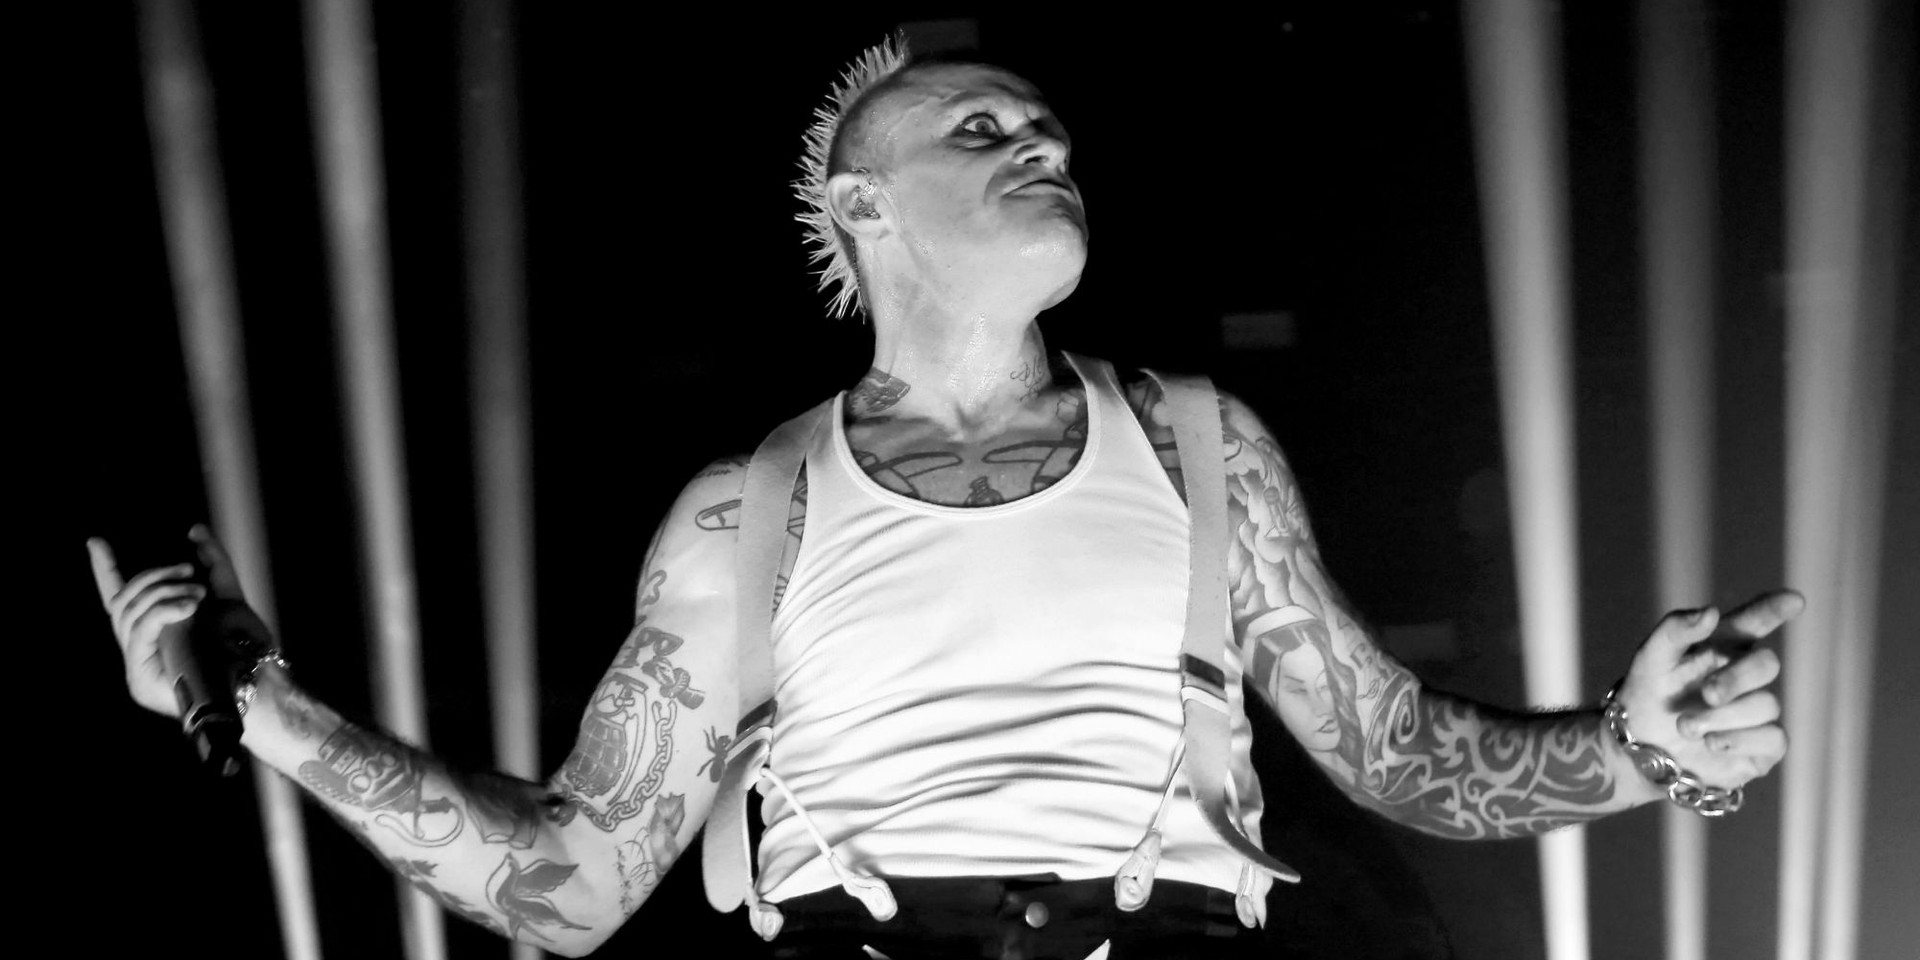 The Prodigy's Keith Flint has passed away